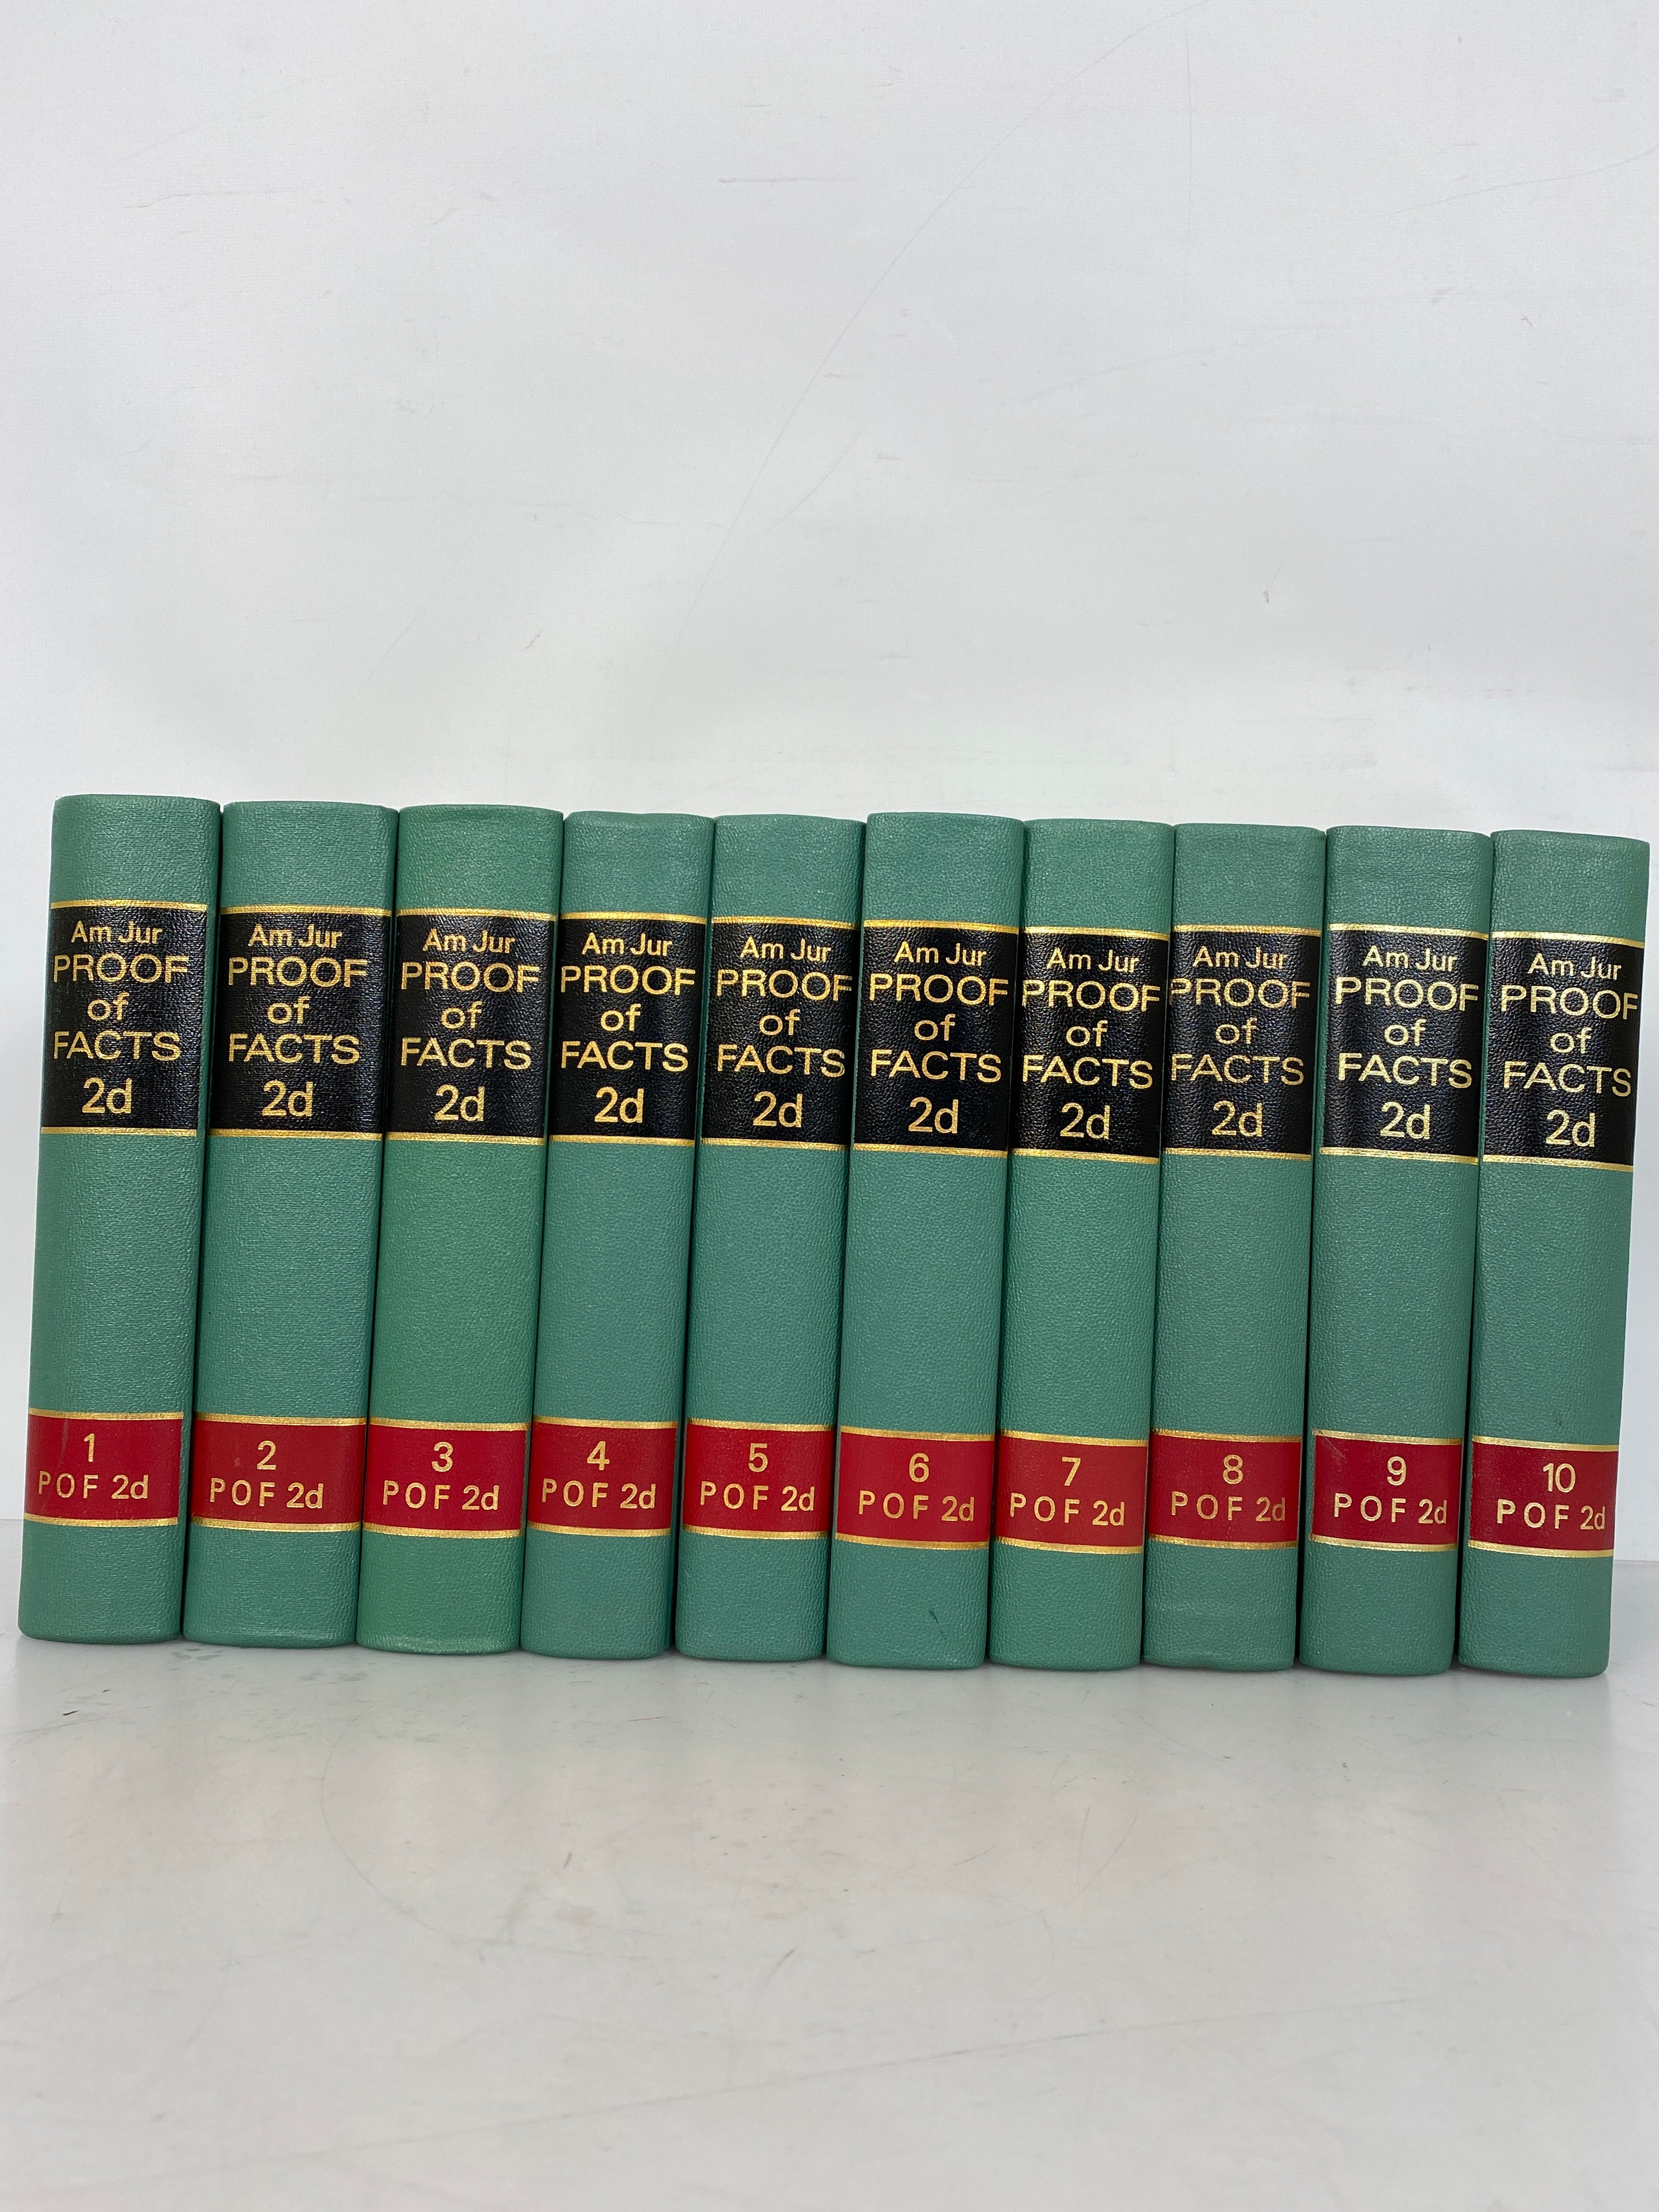 American Jurisprudence Proof of Facts 2d Second Series First 10 Volumes HC